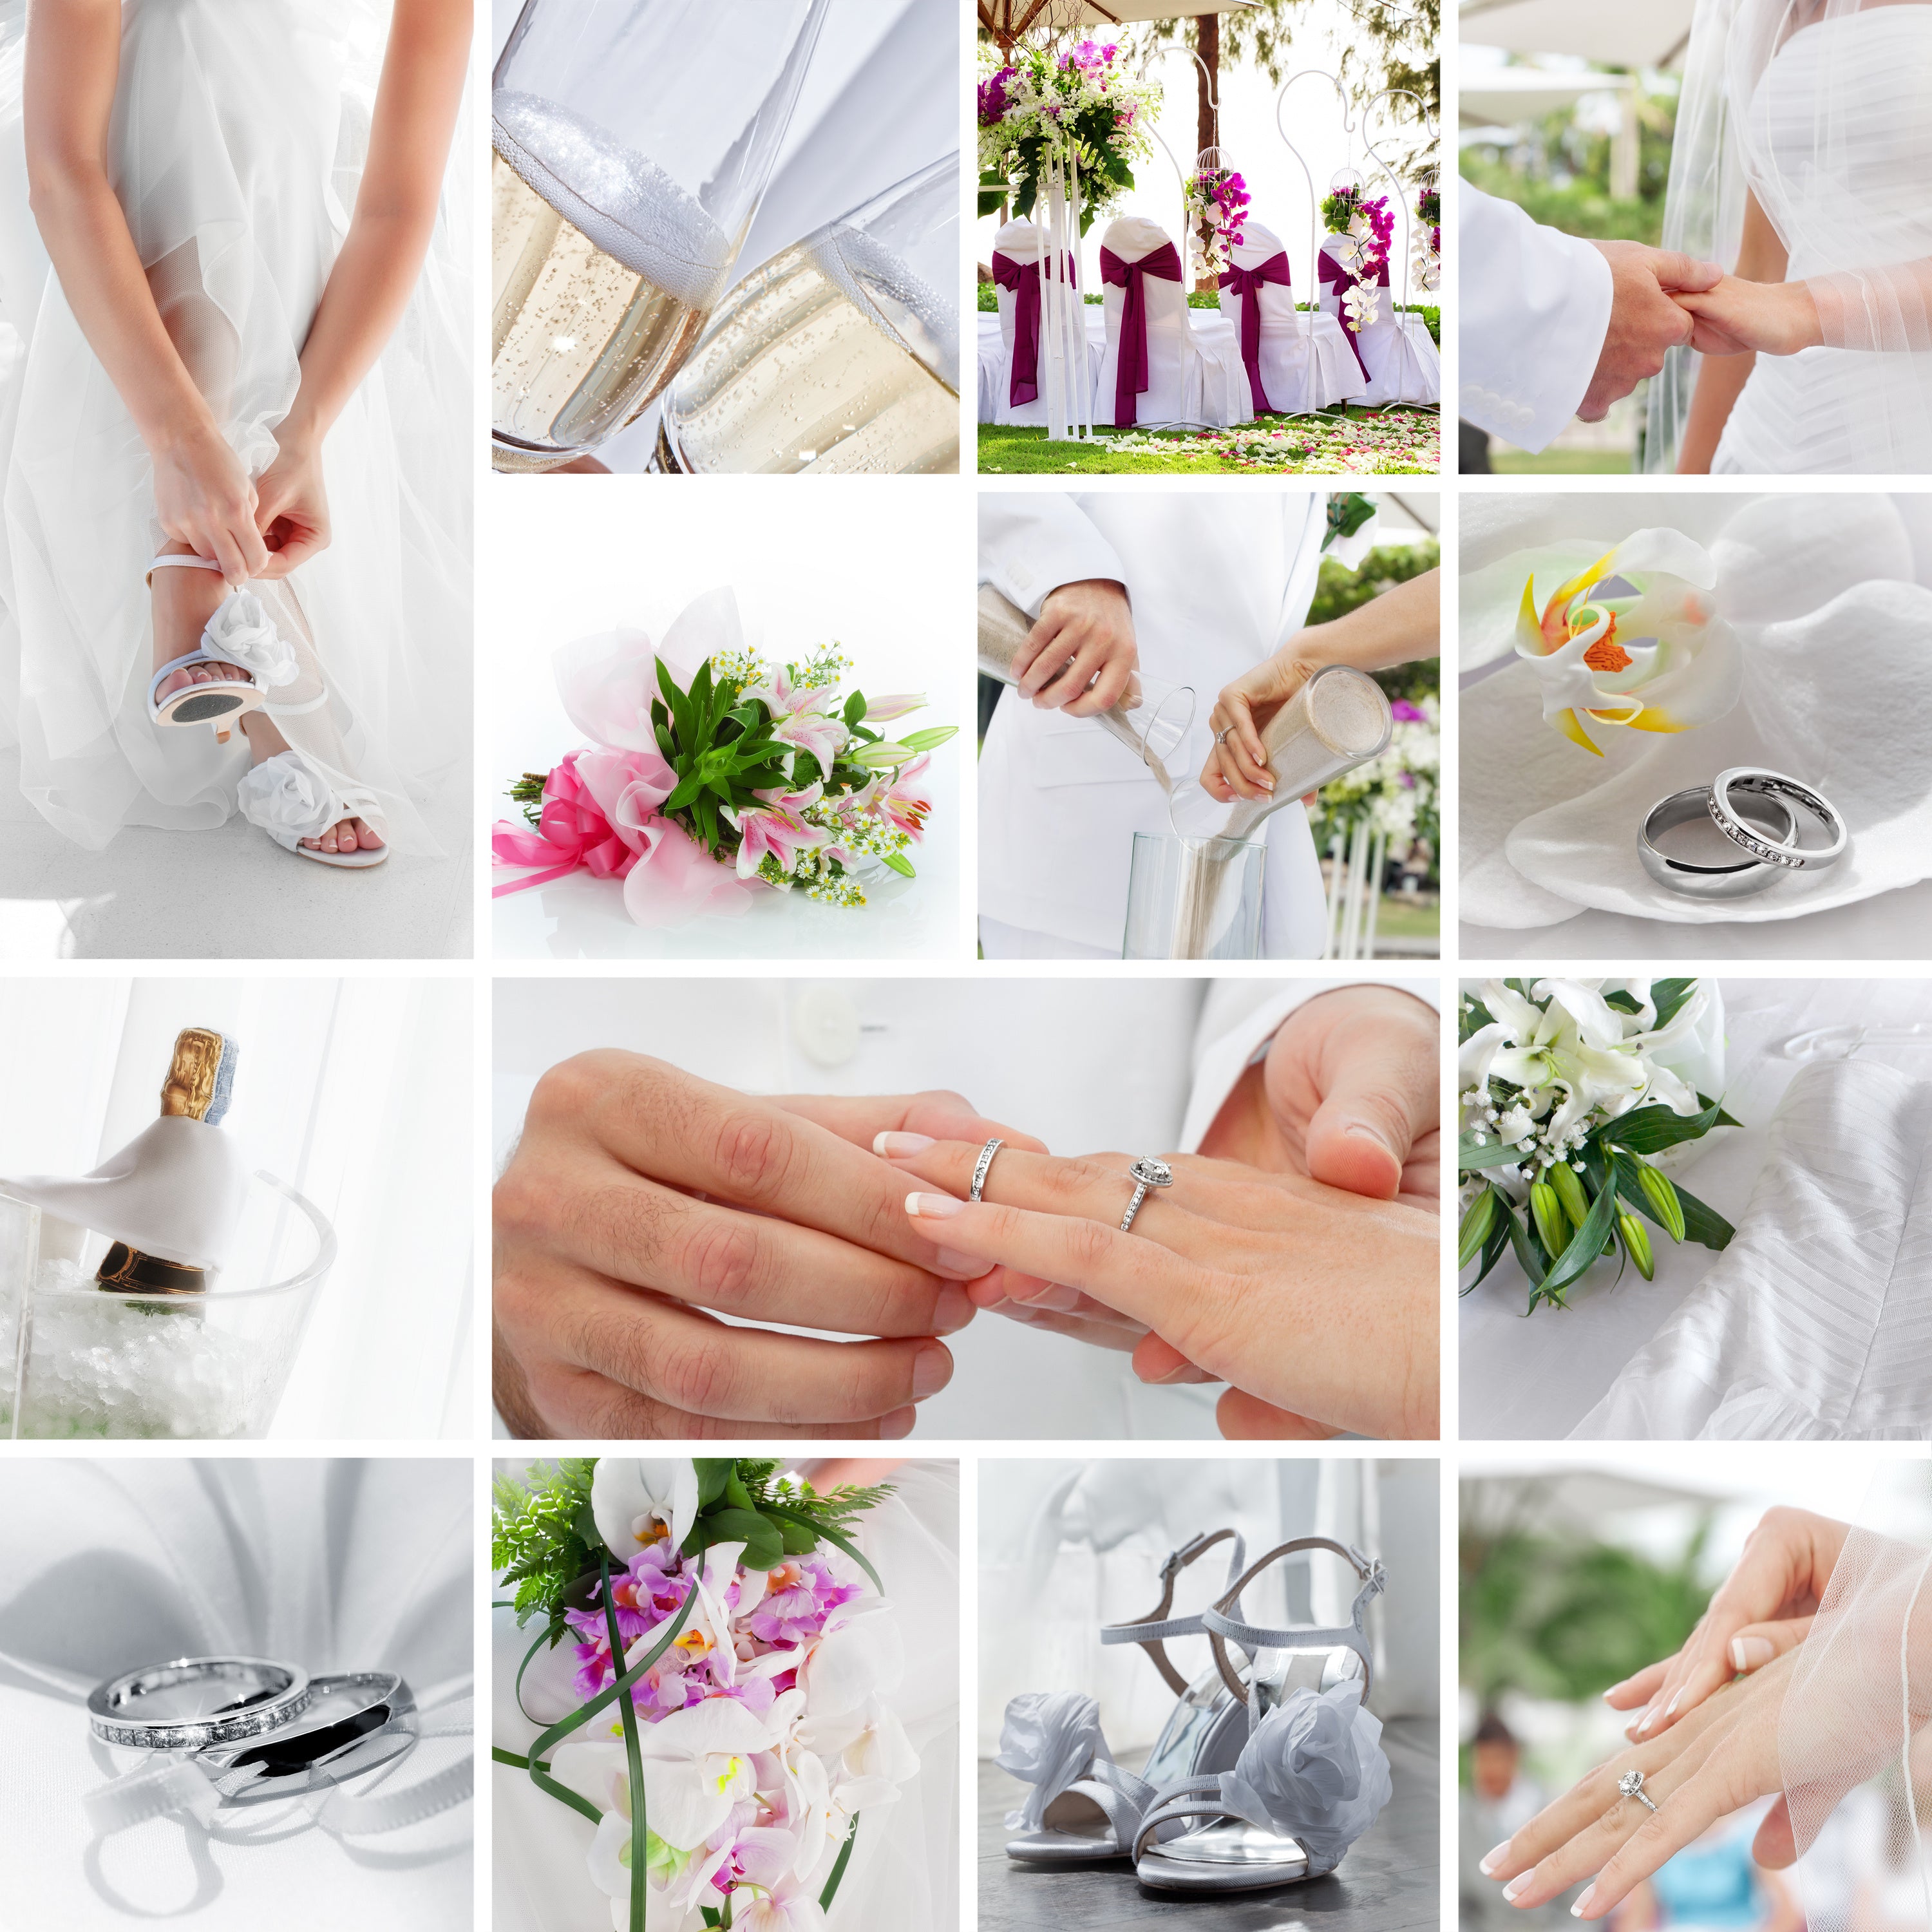 Collage of wedding photos showing all the important little details